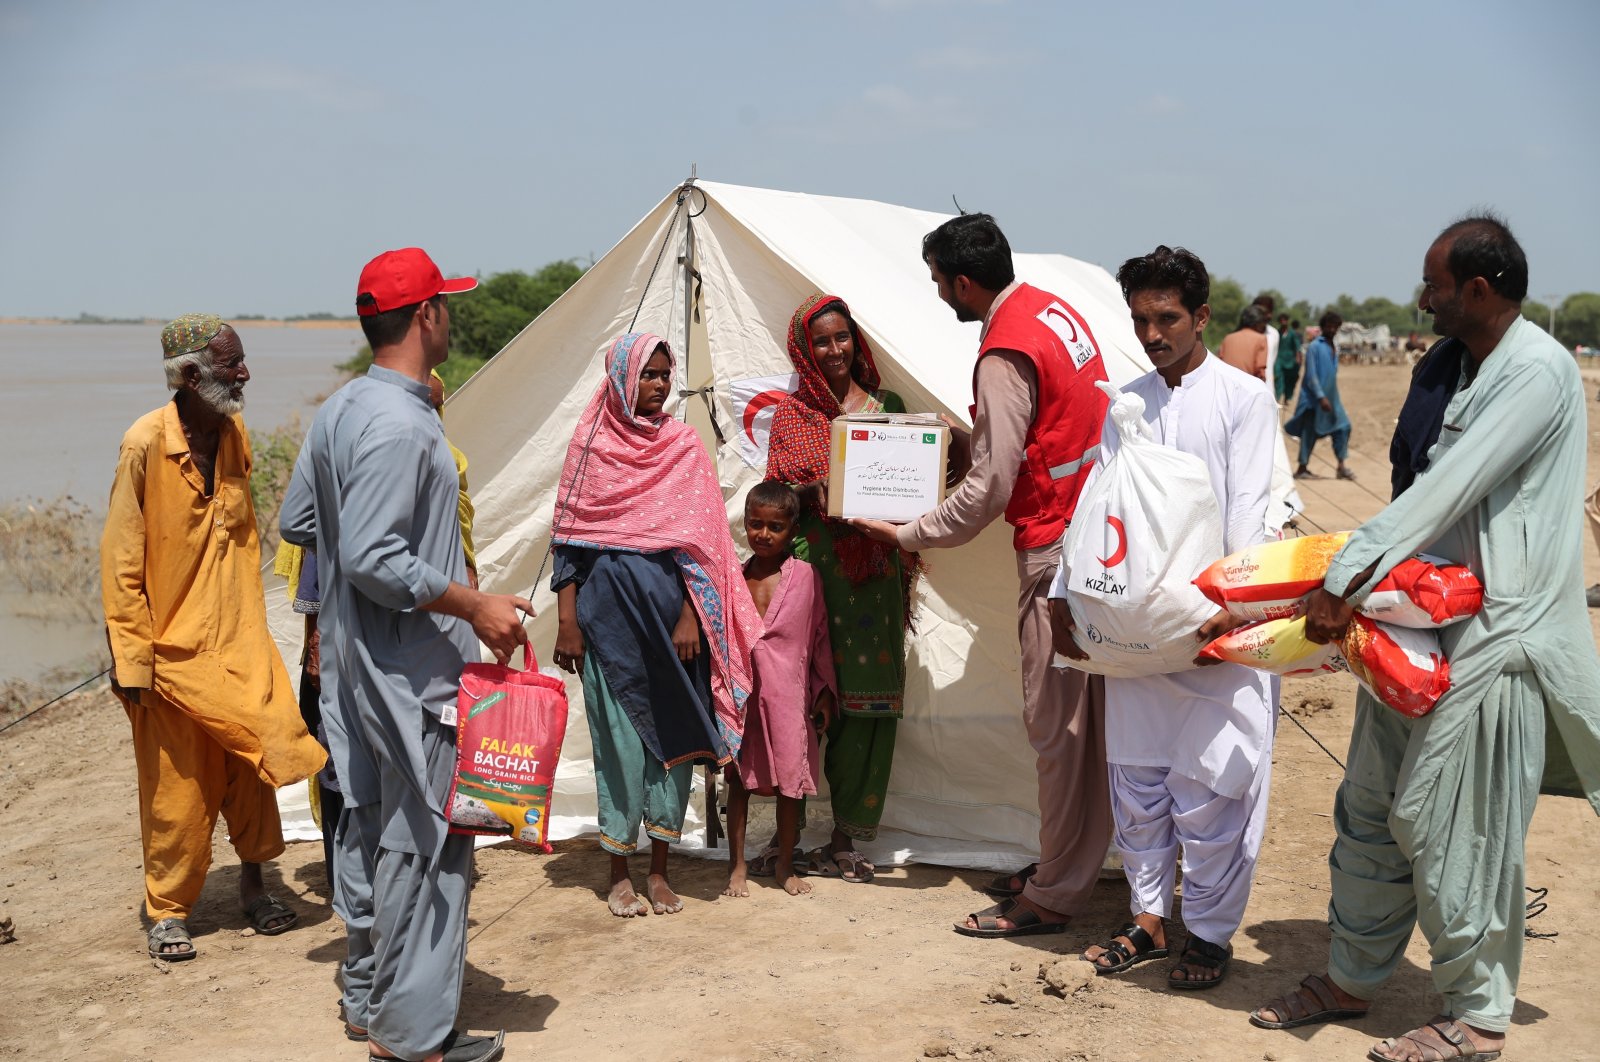 Turkish Red Crescent workers set up tents in Pakistan, Sept. 19, 2022. (DHA Photo)